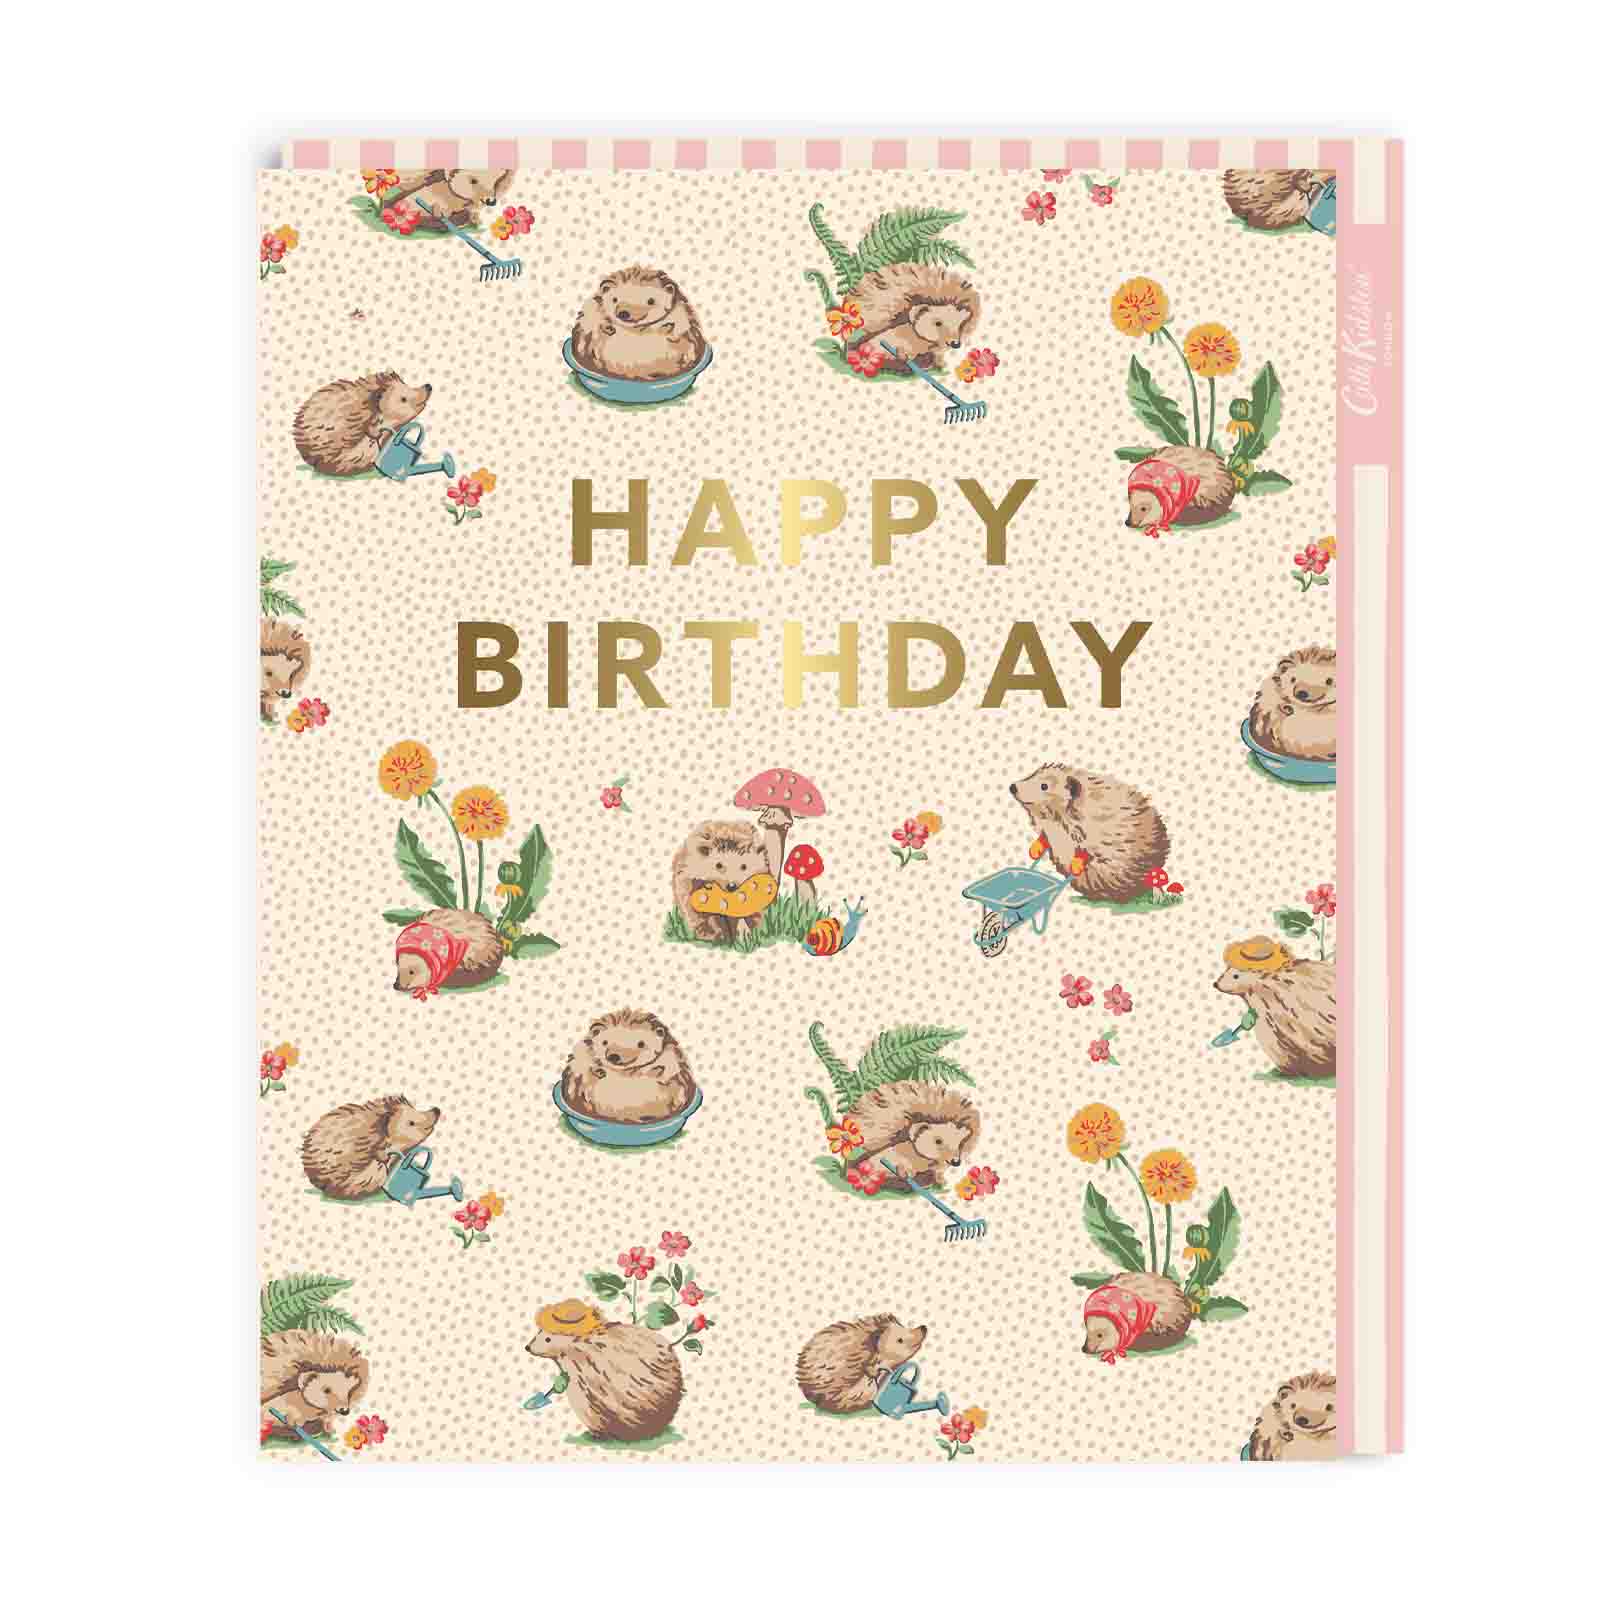 Birthday card with a cute hedgehogs illustration and gold foil lettering that reads Happy Birthday